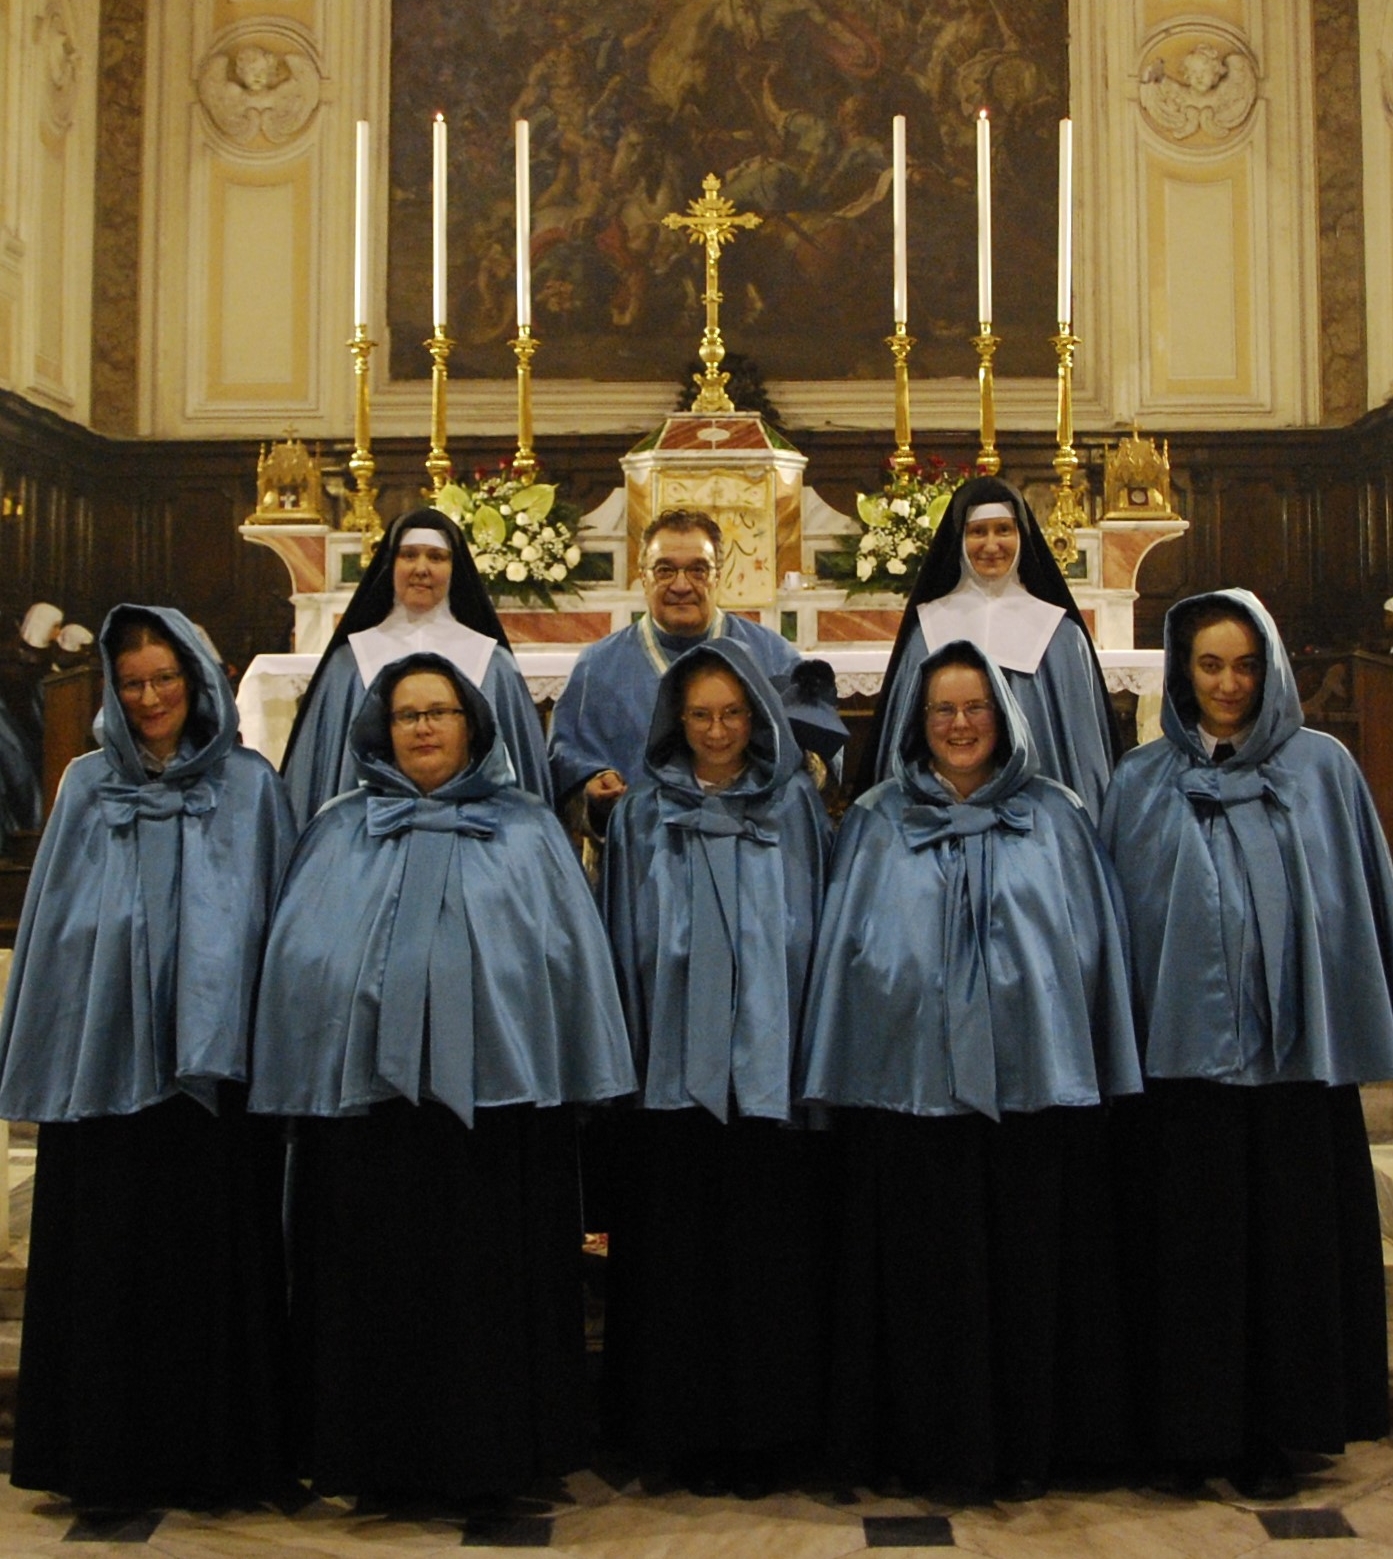 A Word from the Sister Adorers: Five New Postulants